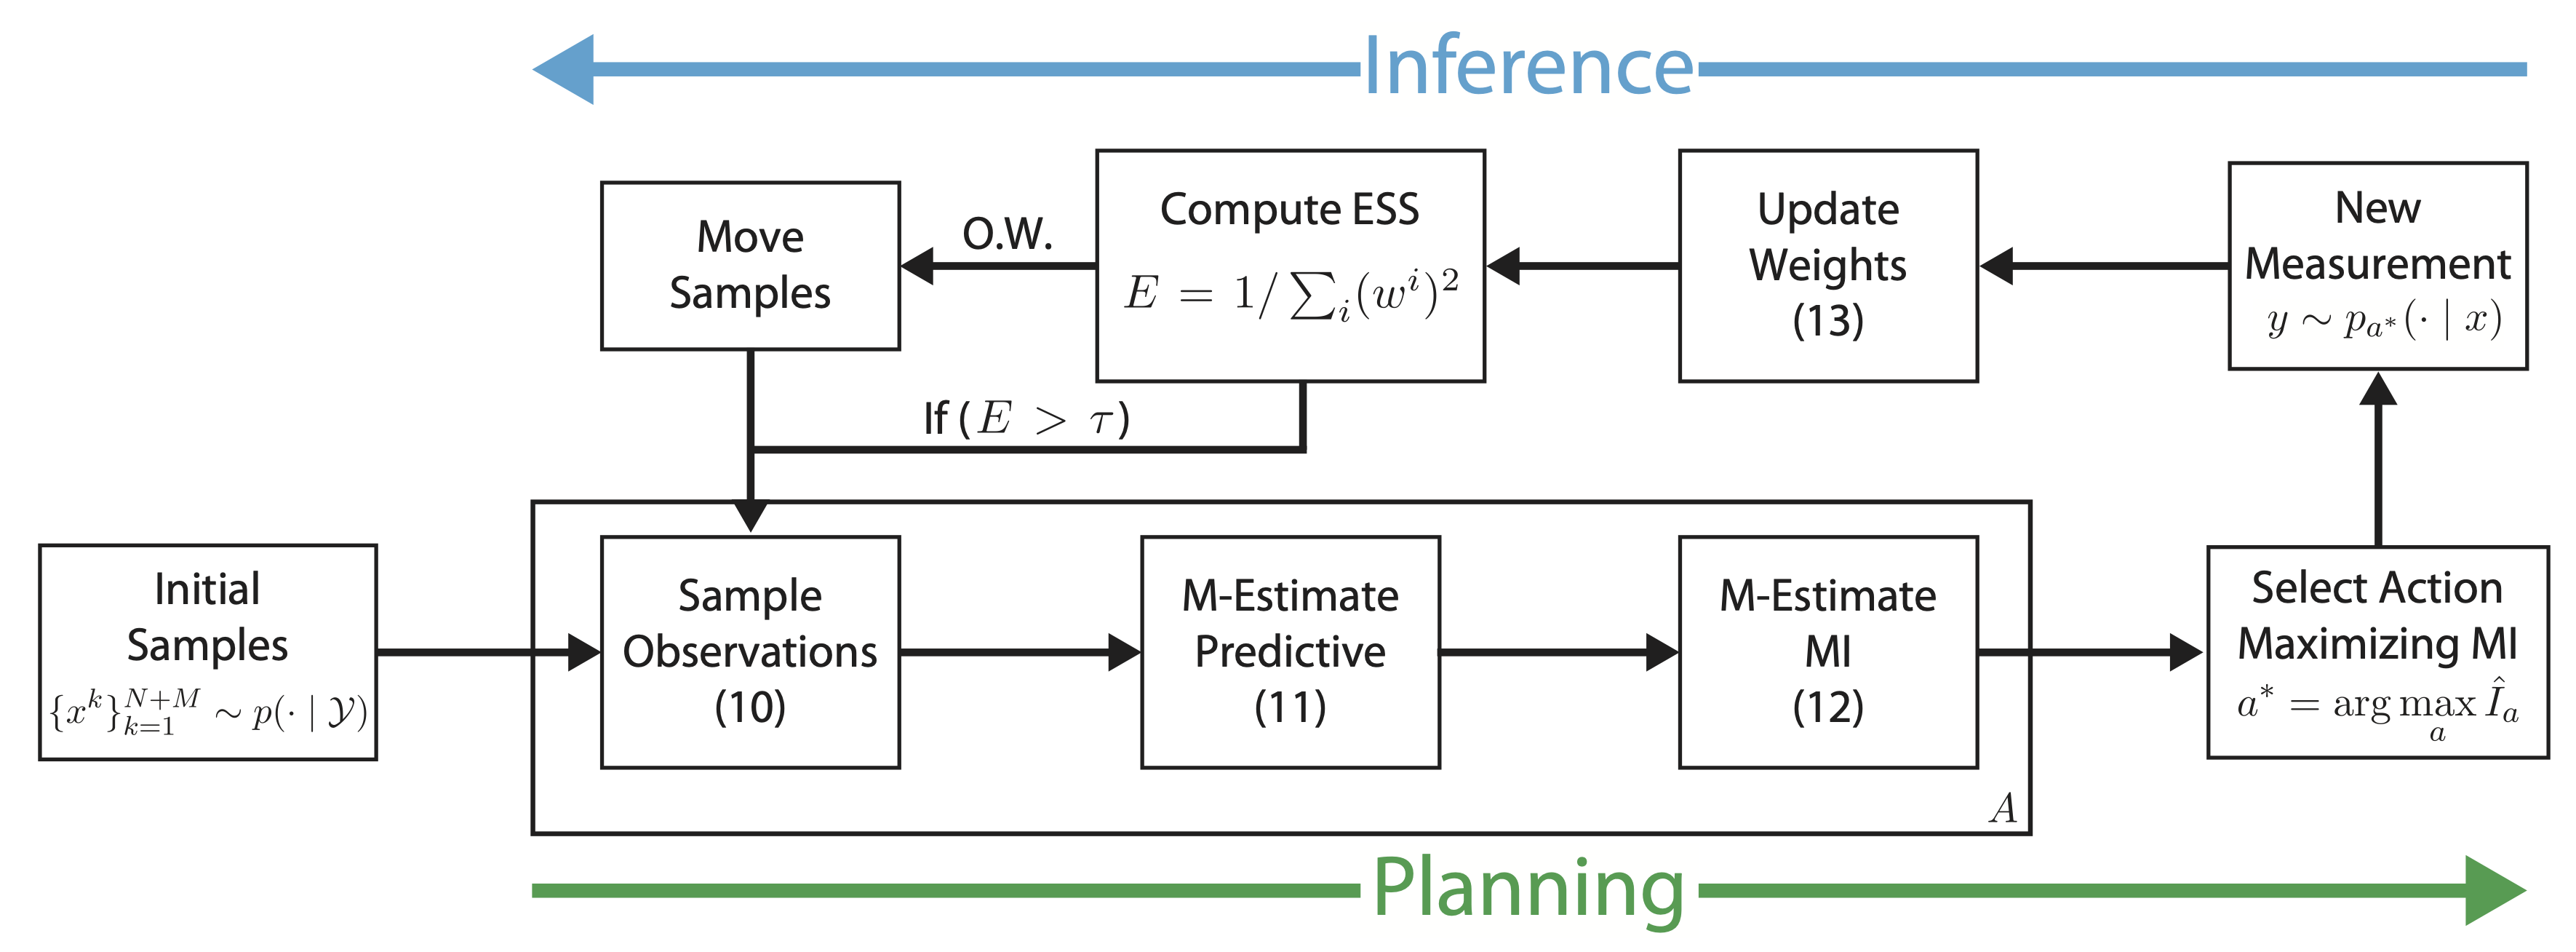 Robust Sequential Planning